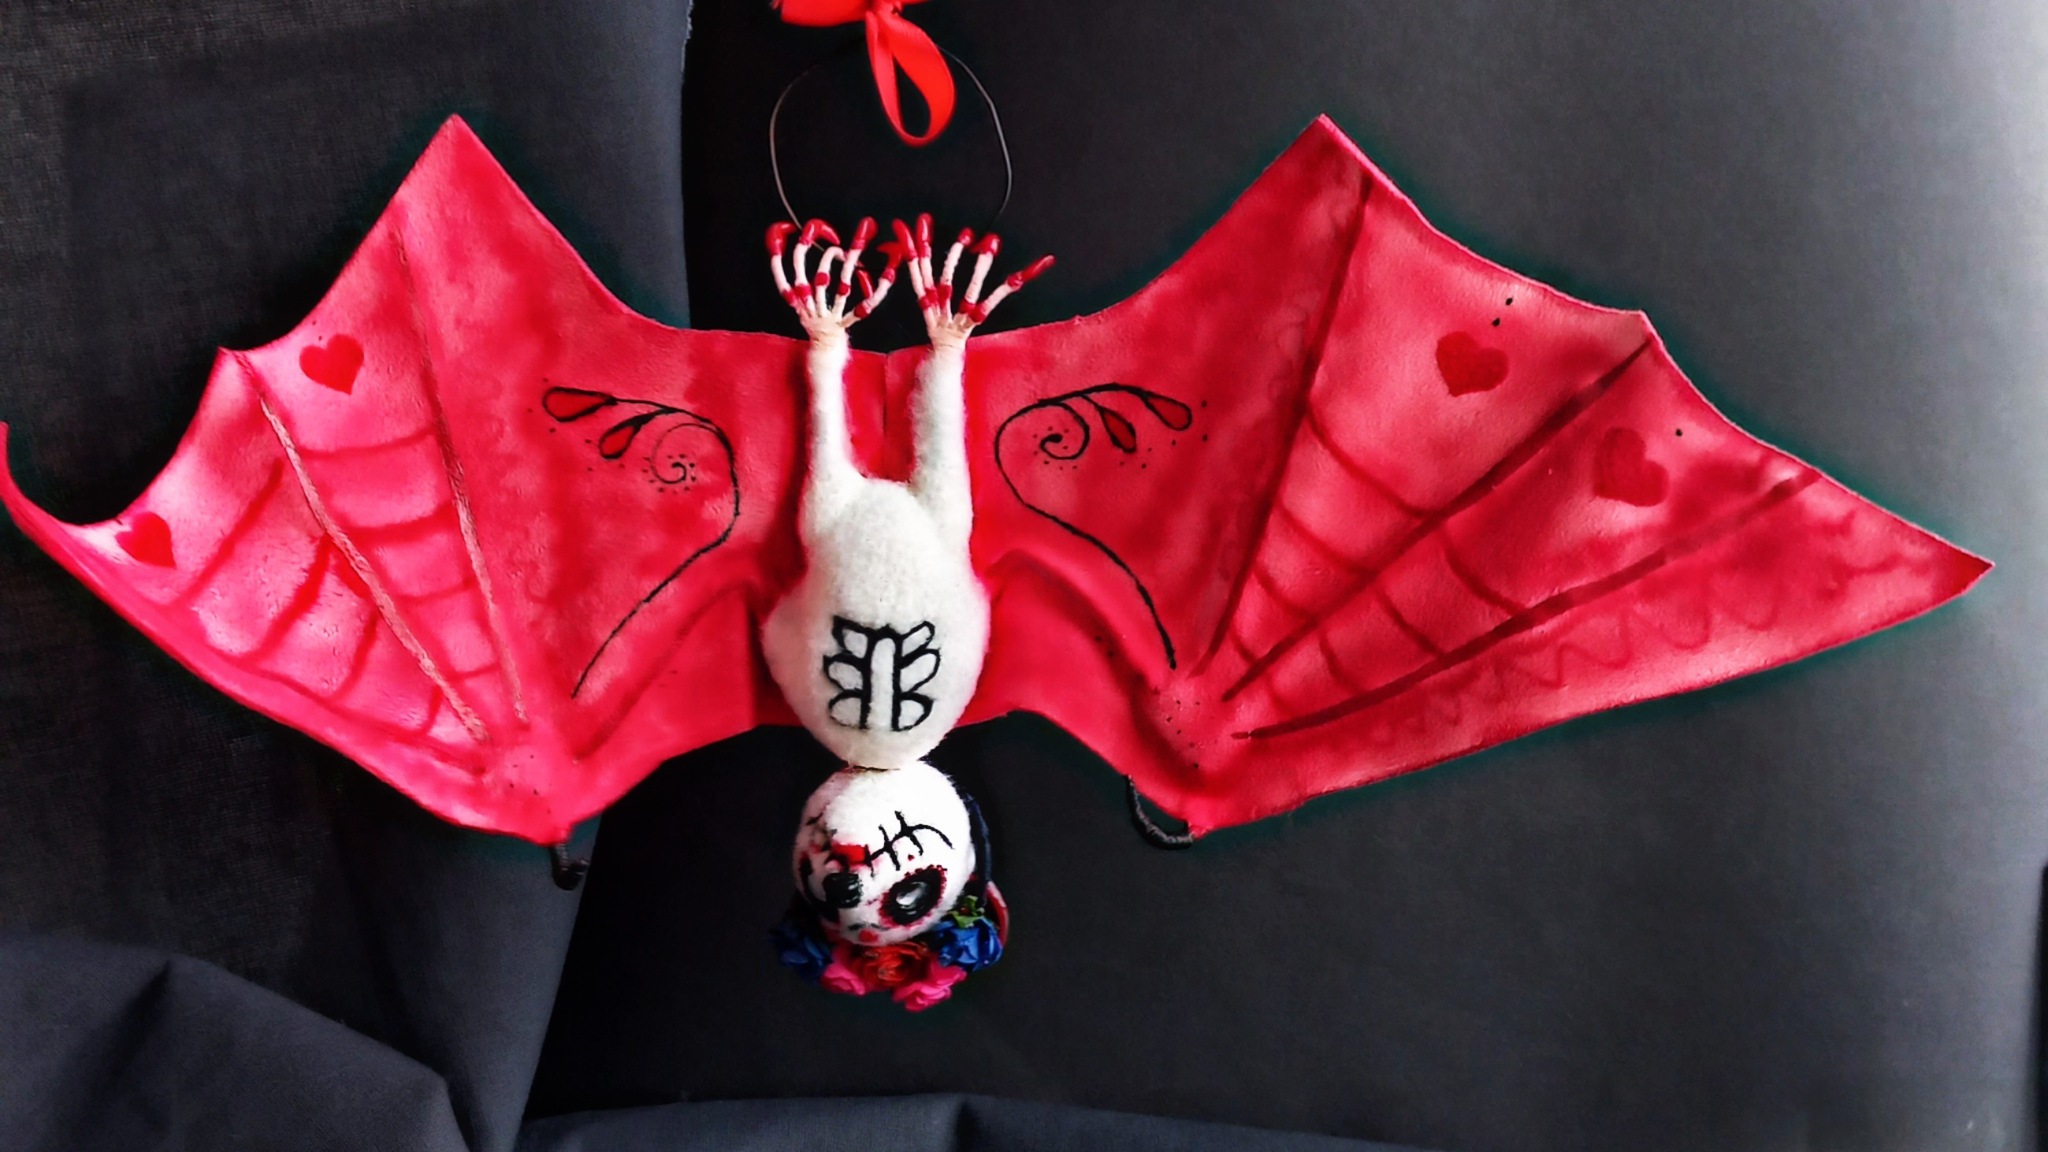 Bat toy in the style of Calavera Katrina - Halloween, Longpost, Presents, Fantasy, Mystic, Gothic, All Saints' Day, The day of the Dead, Handmade dolls, Rukozhop, Needlework, Interior toy, Frame toy, Wool toy, Milota, Plush Toys, Author's toy, Soft toy, Hobby, Needlework without process, Handmade, My